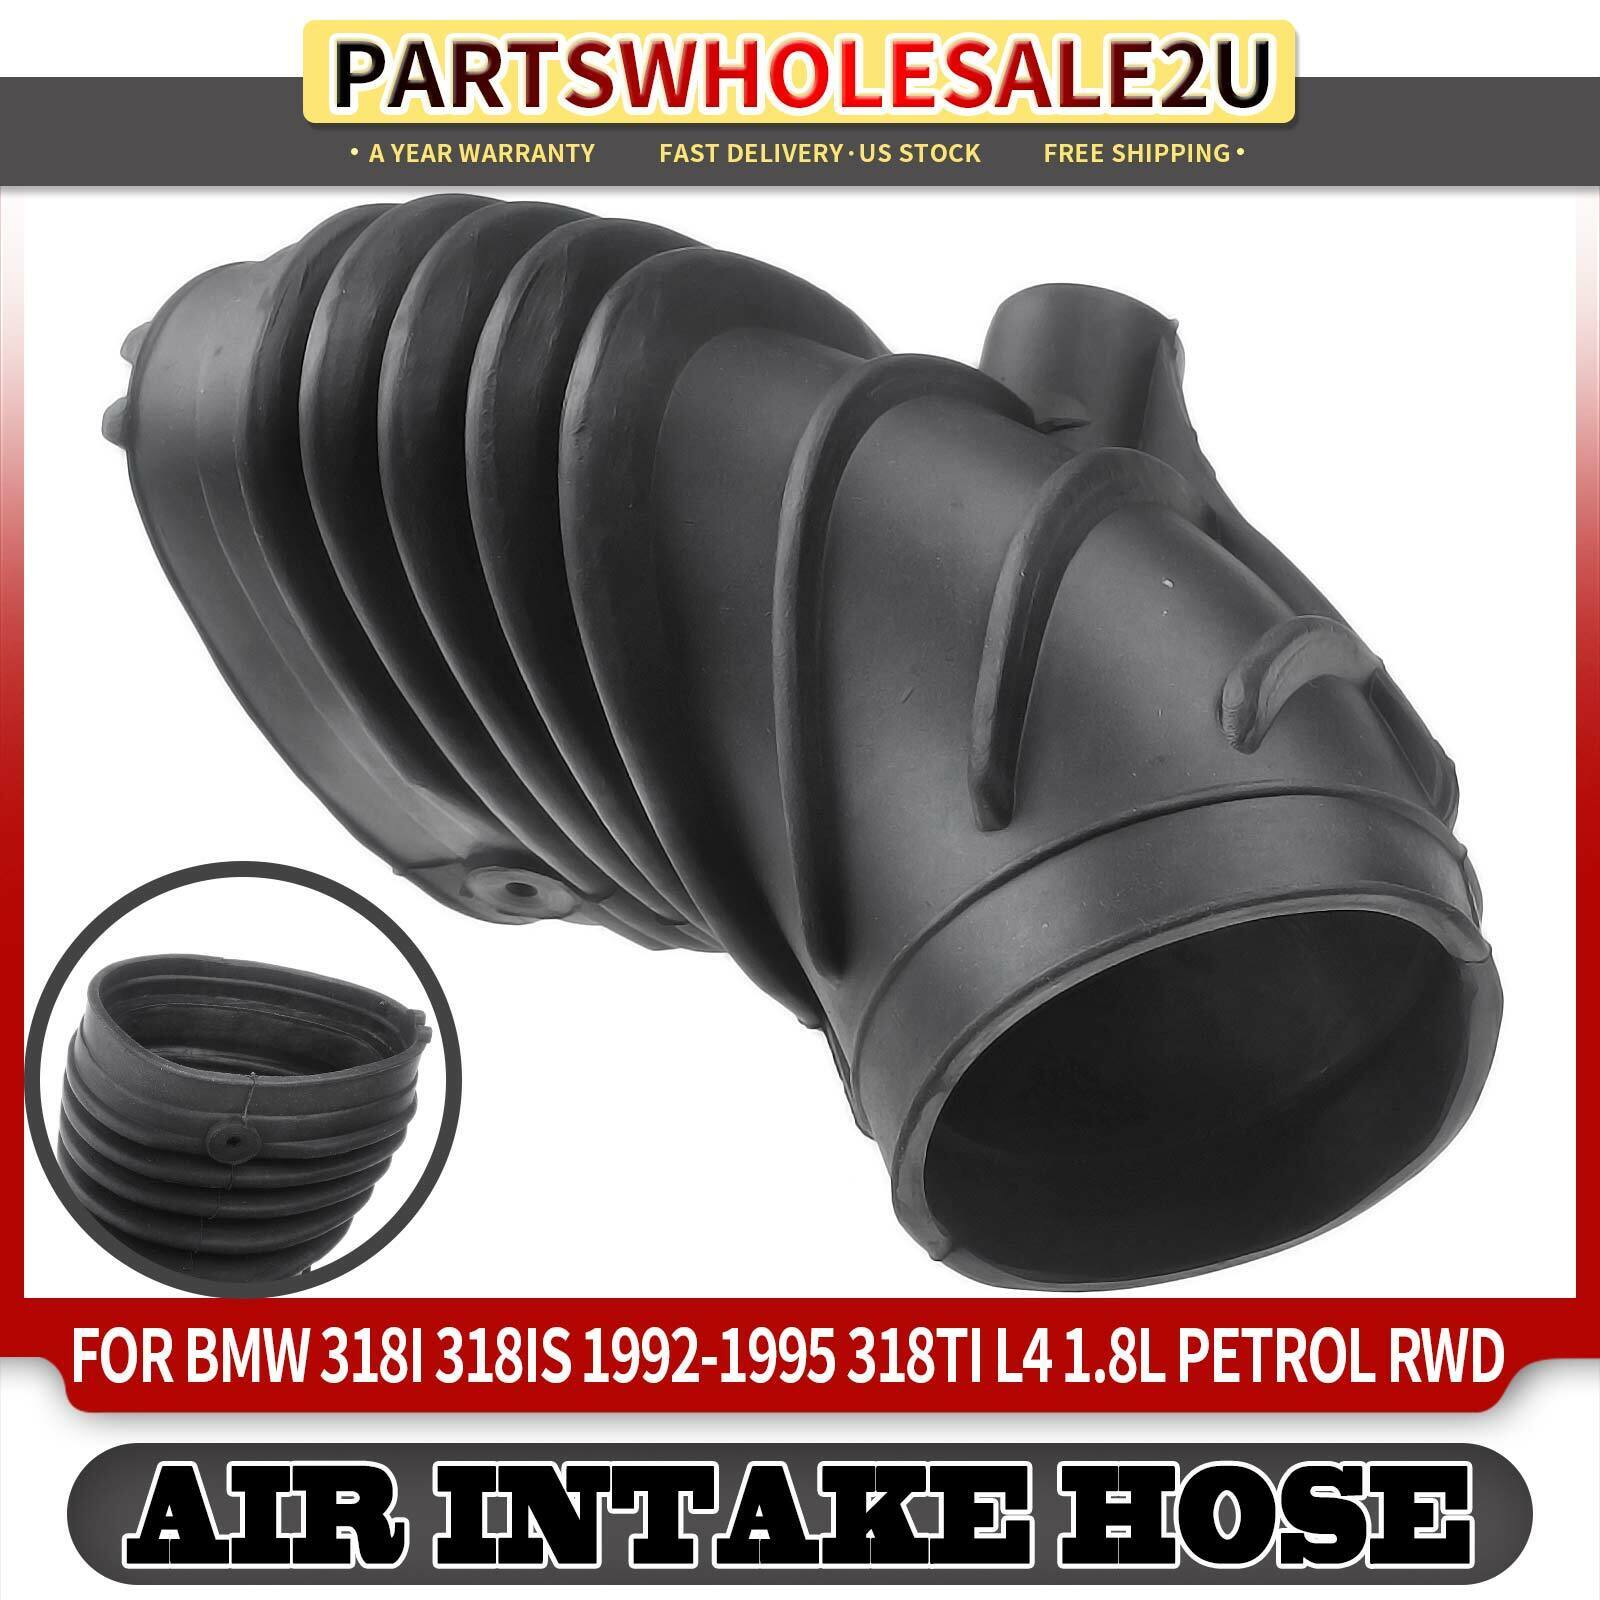 Air Clean Intake Tube Hose for BMW E36 318i 92-95 318is 92-95 318ti 1995 L4 1.8L